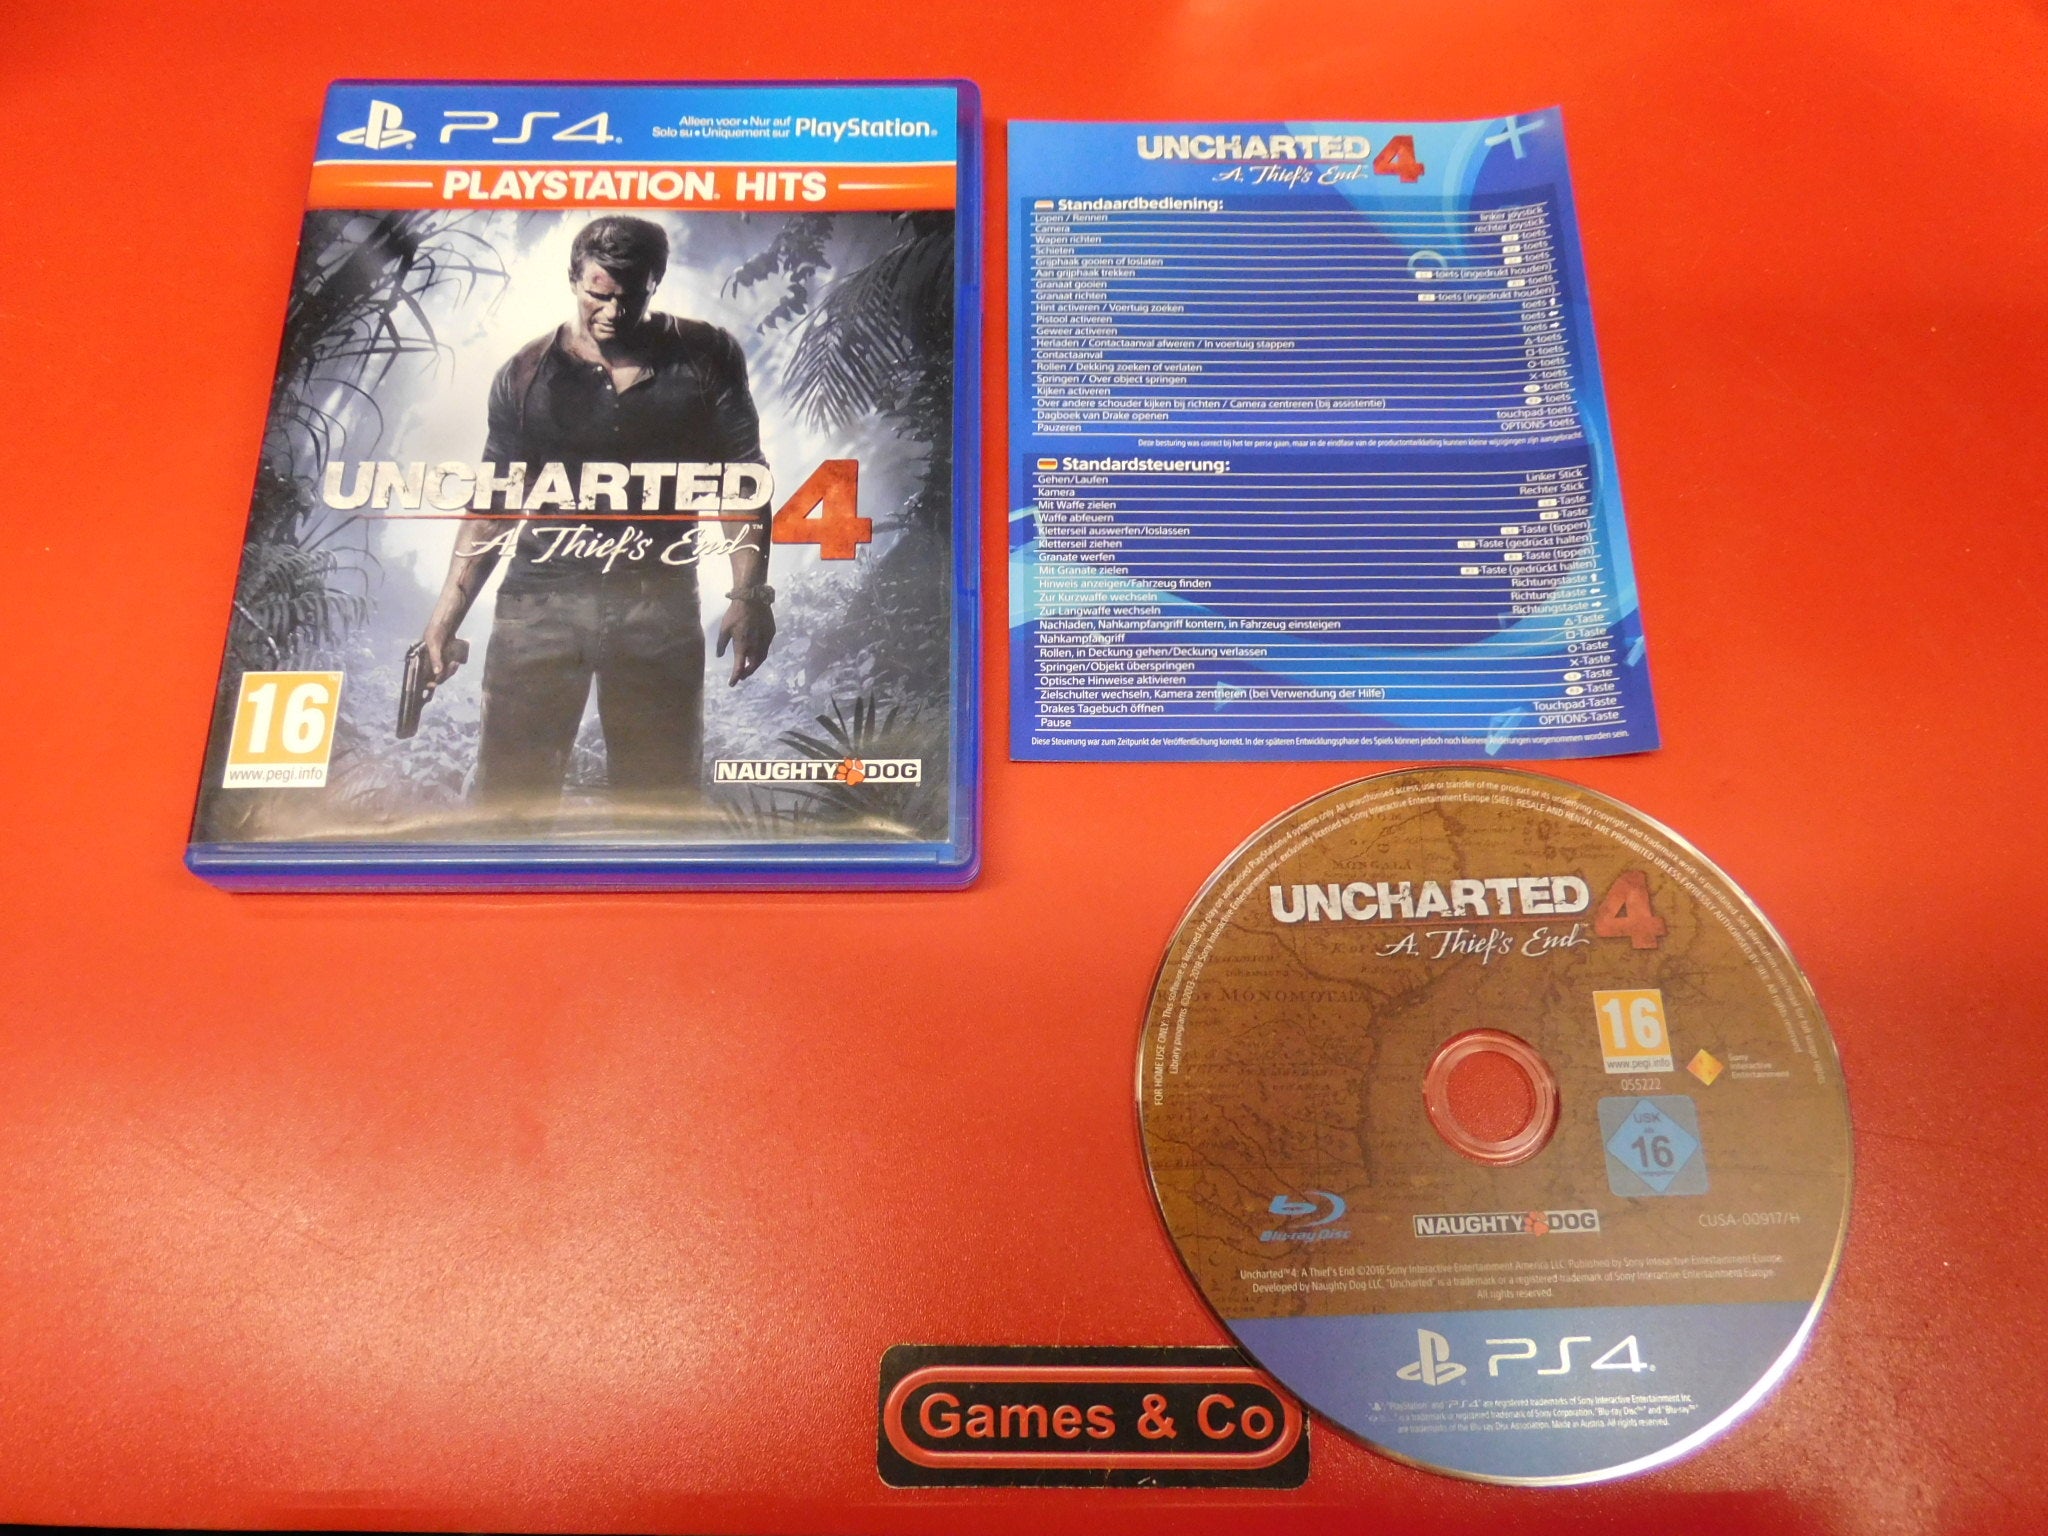 UNCHARTED 4 A THIEF'S END